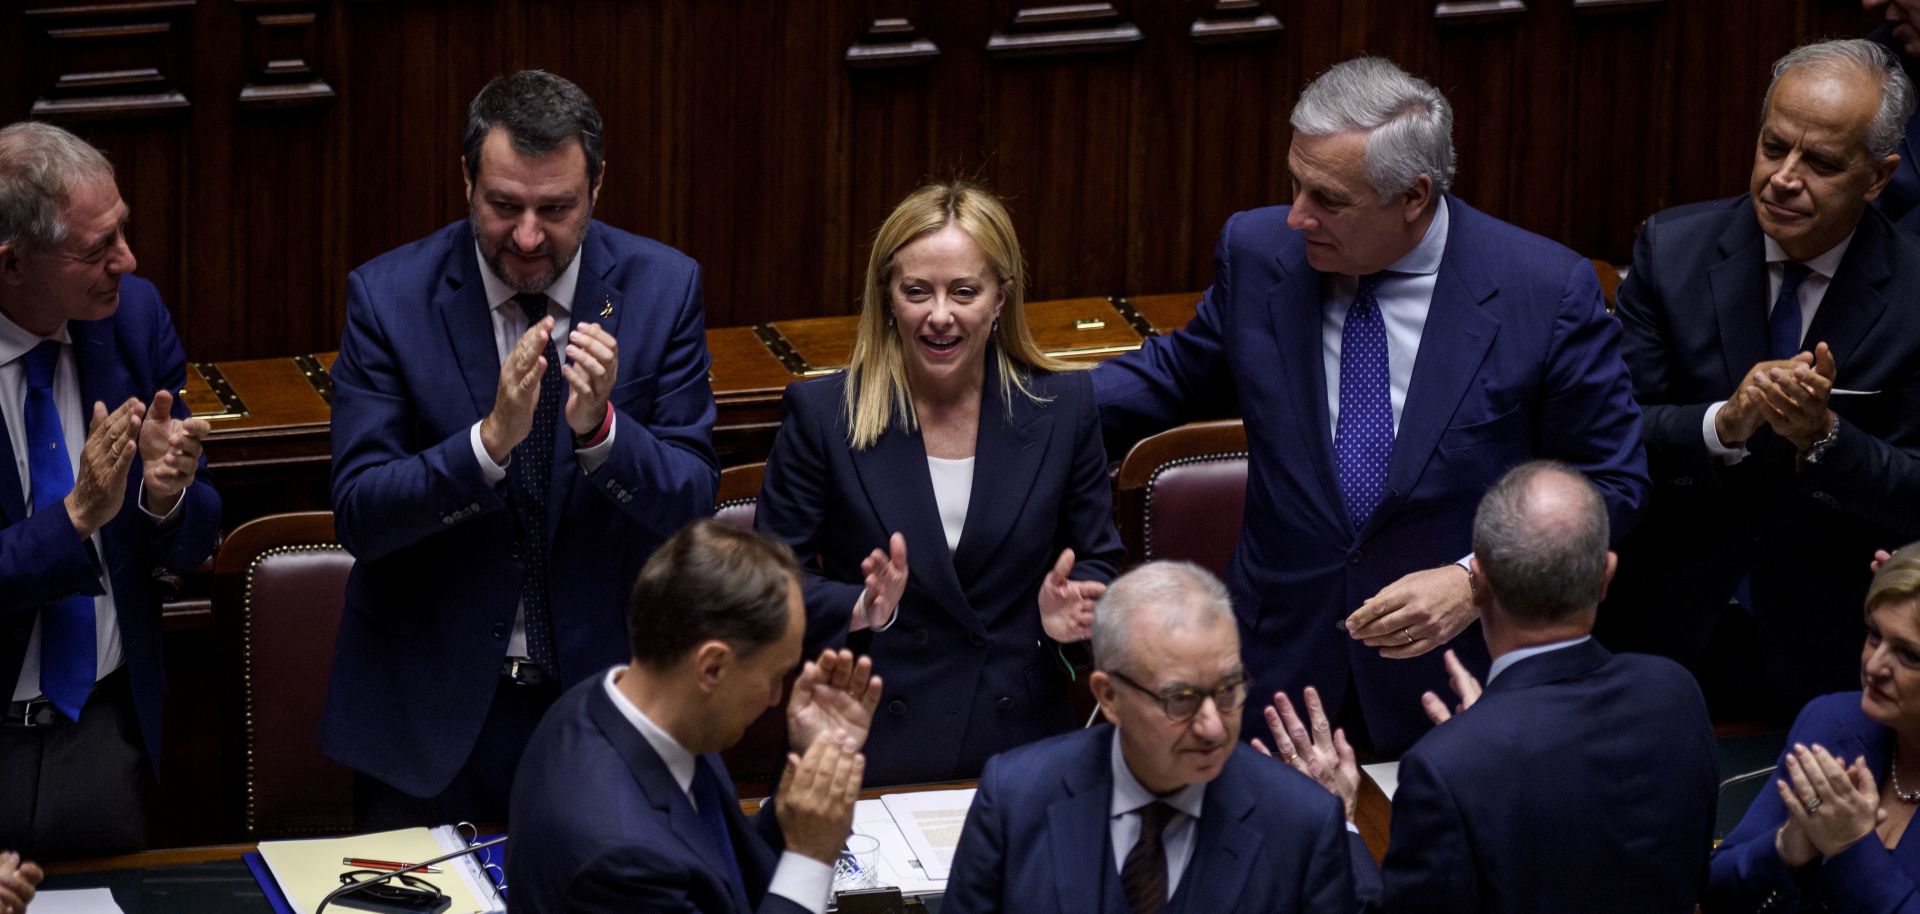 Italian Prime Minister Giorgia Meloni and members of her newly appointed cabinet attend a debate in Italy’s Chamber of Deputies ahead of the confidence vote on the new Italian government on Oct. 25, 2022. 